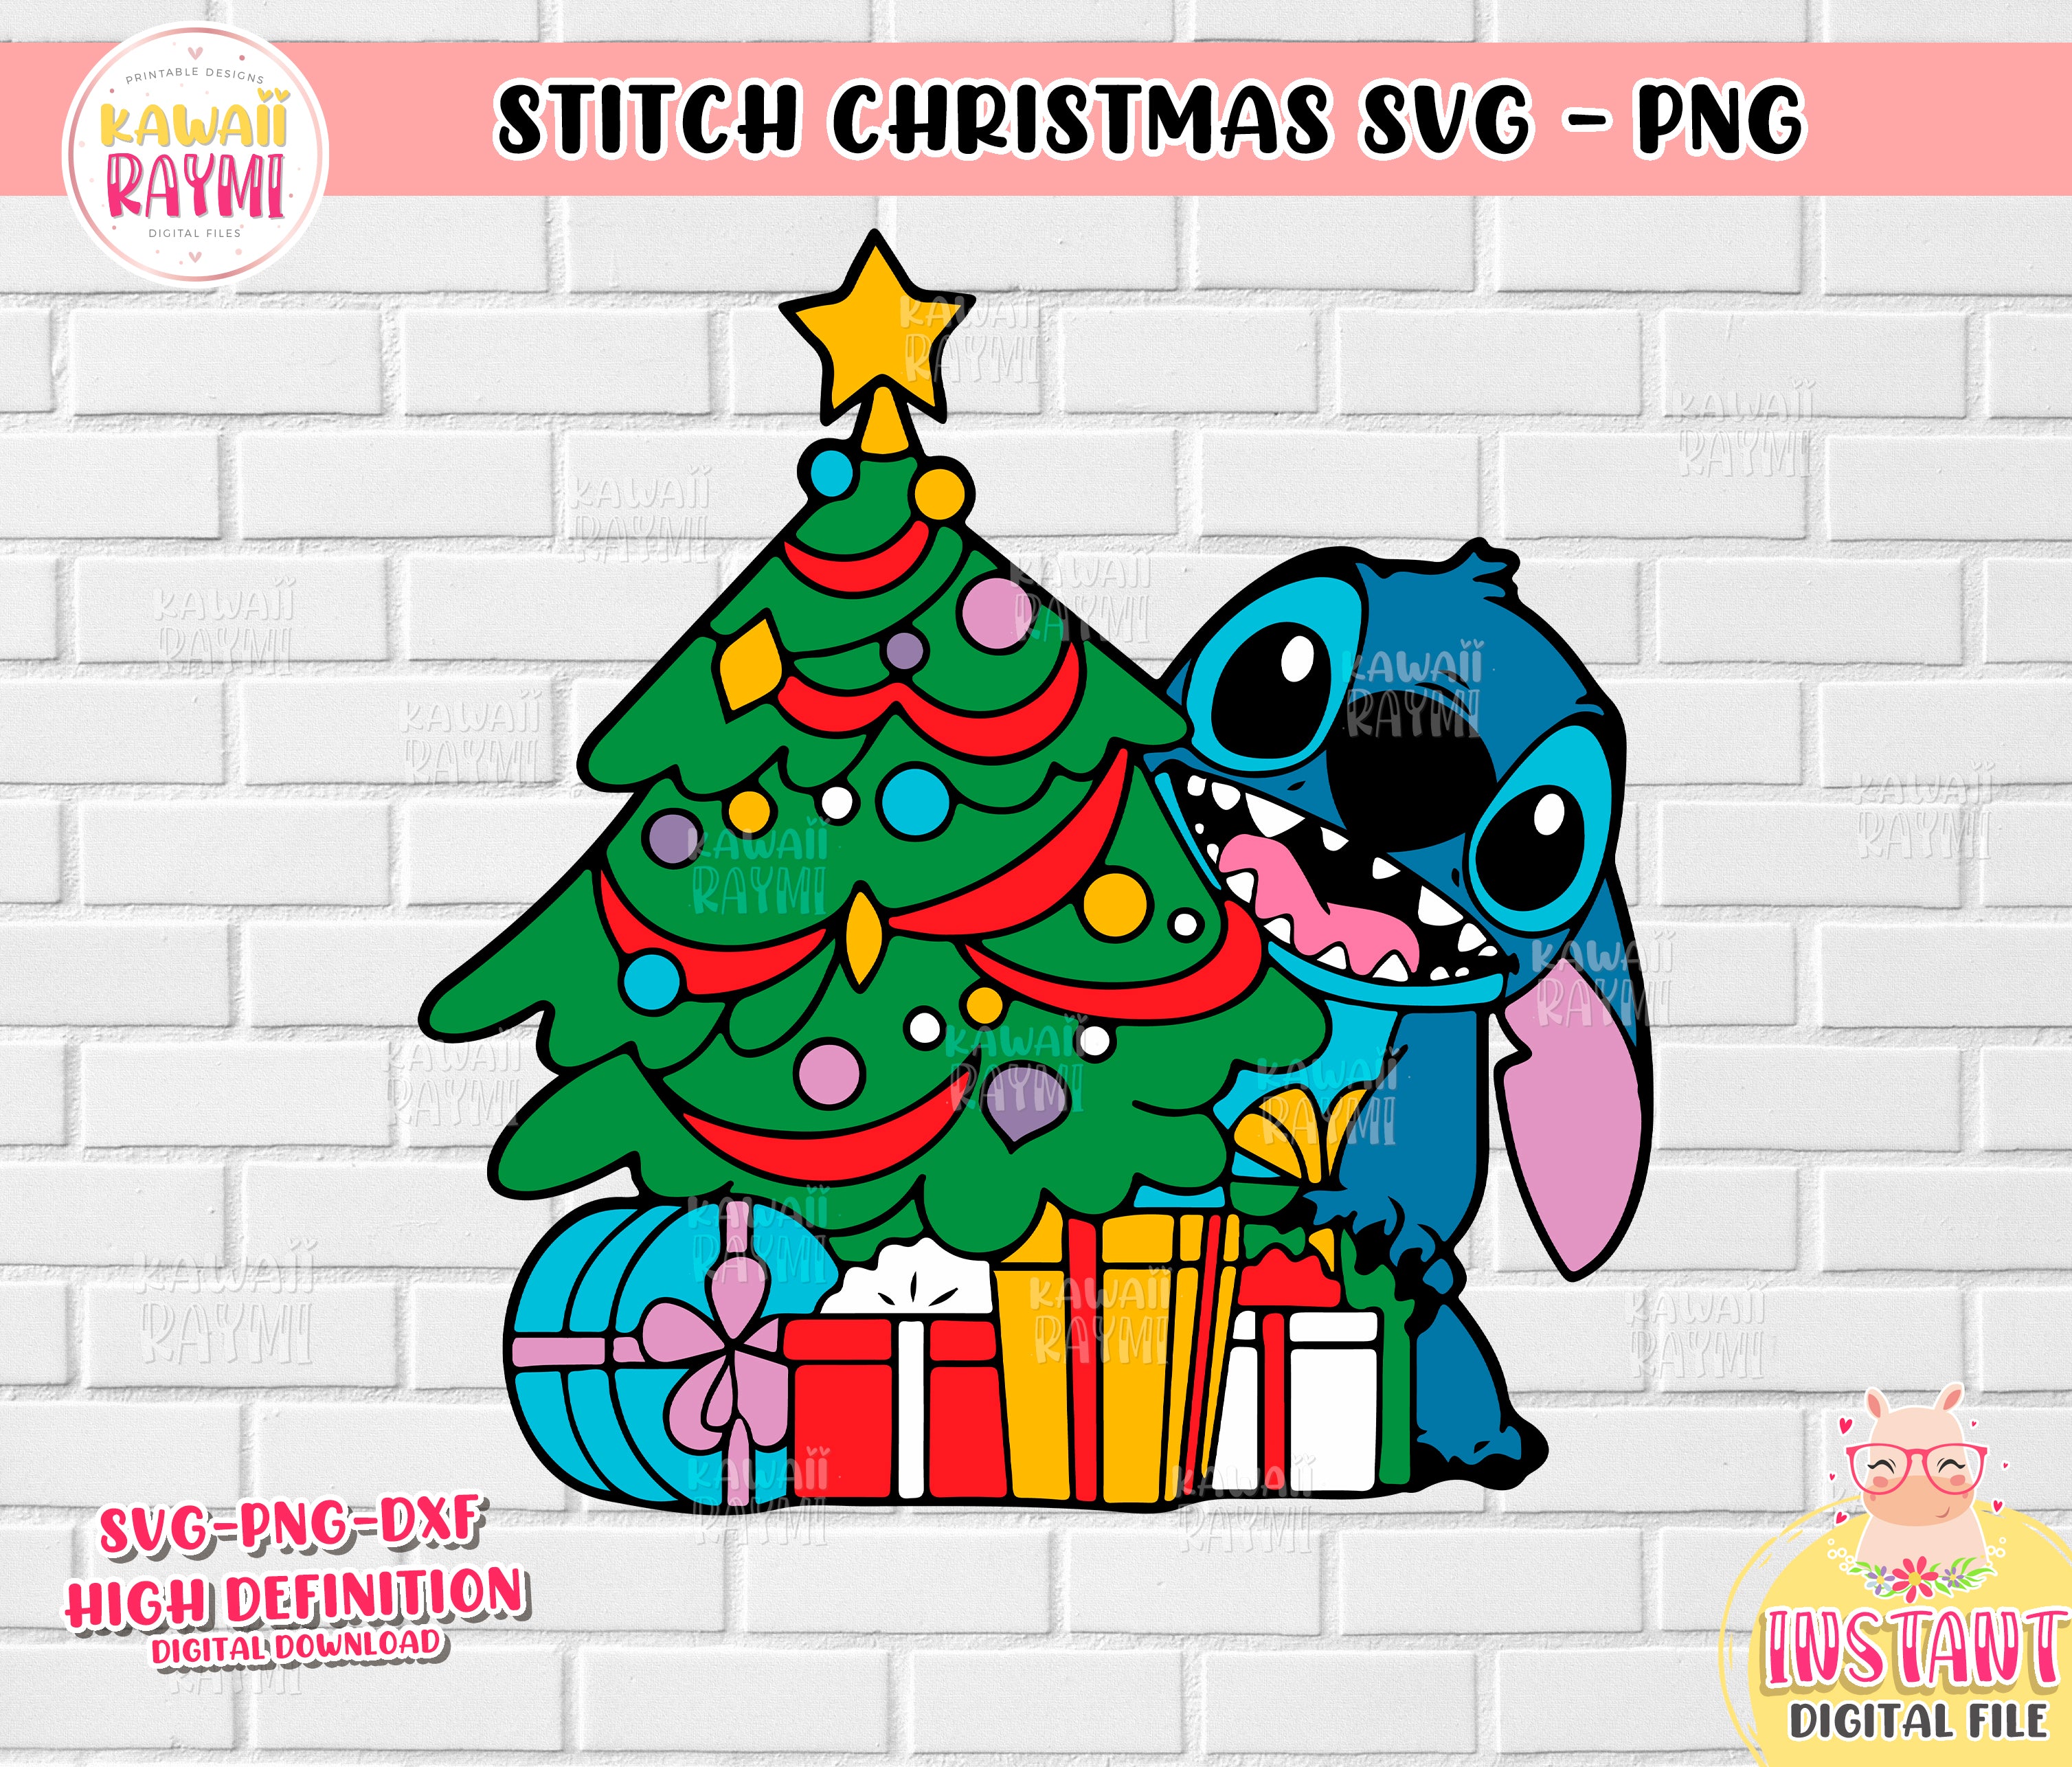 Stitch Cupcake Toppers, Lilo and Stitch, Stitch Party Download, Instant  Download, Stitch Printable Cupcake Toppers 